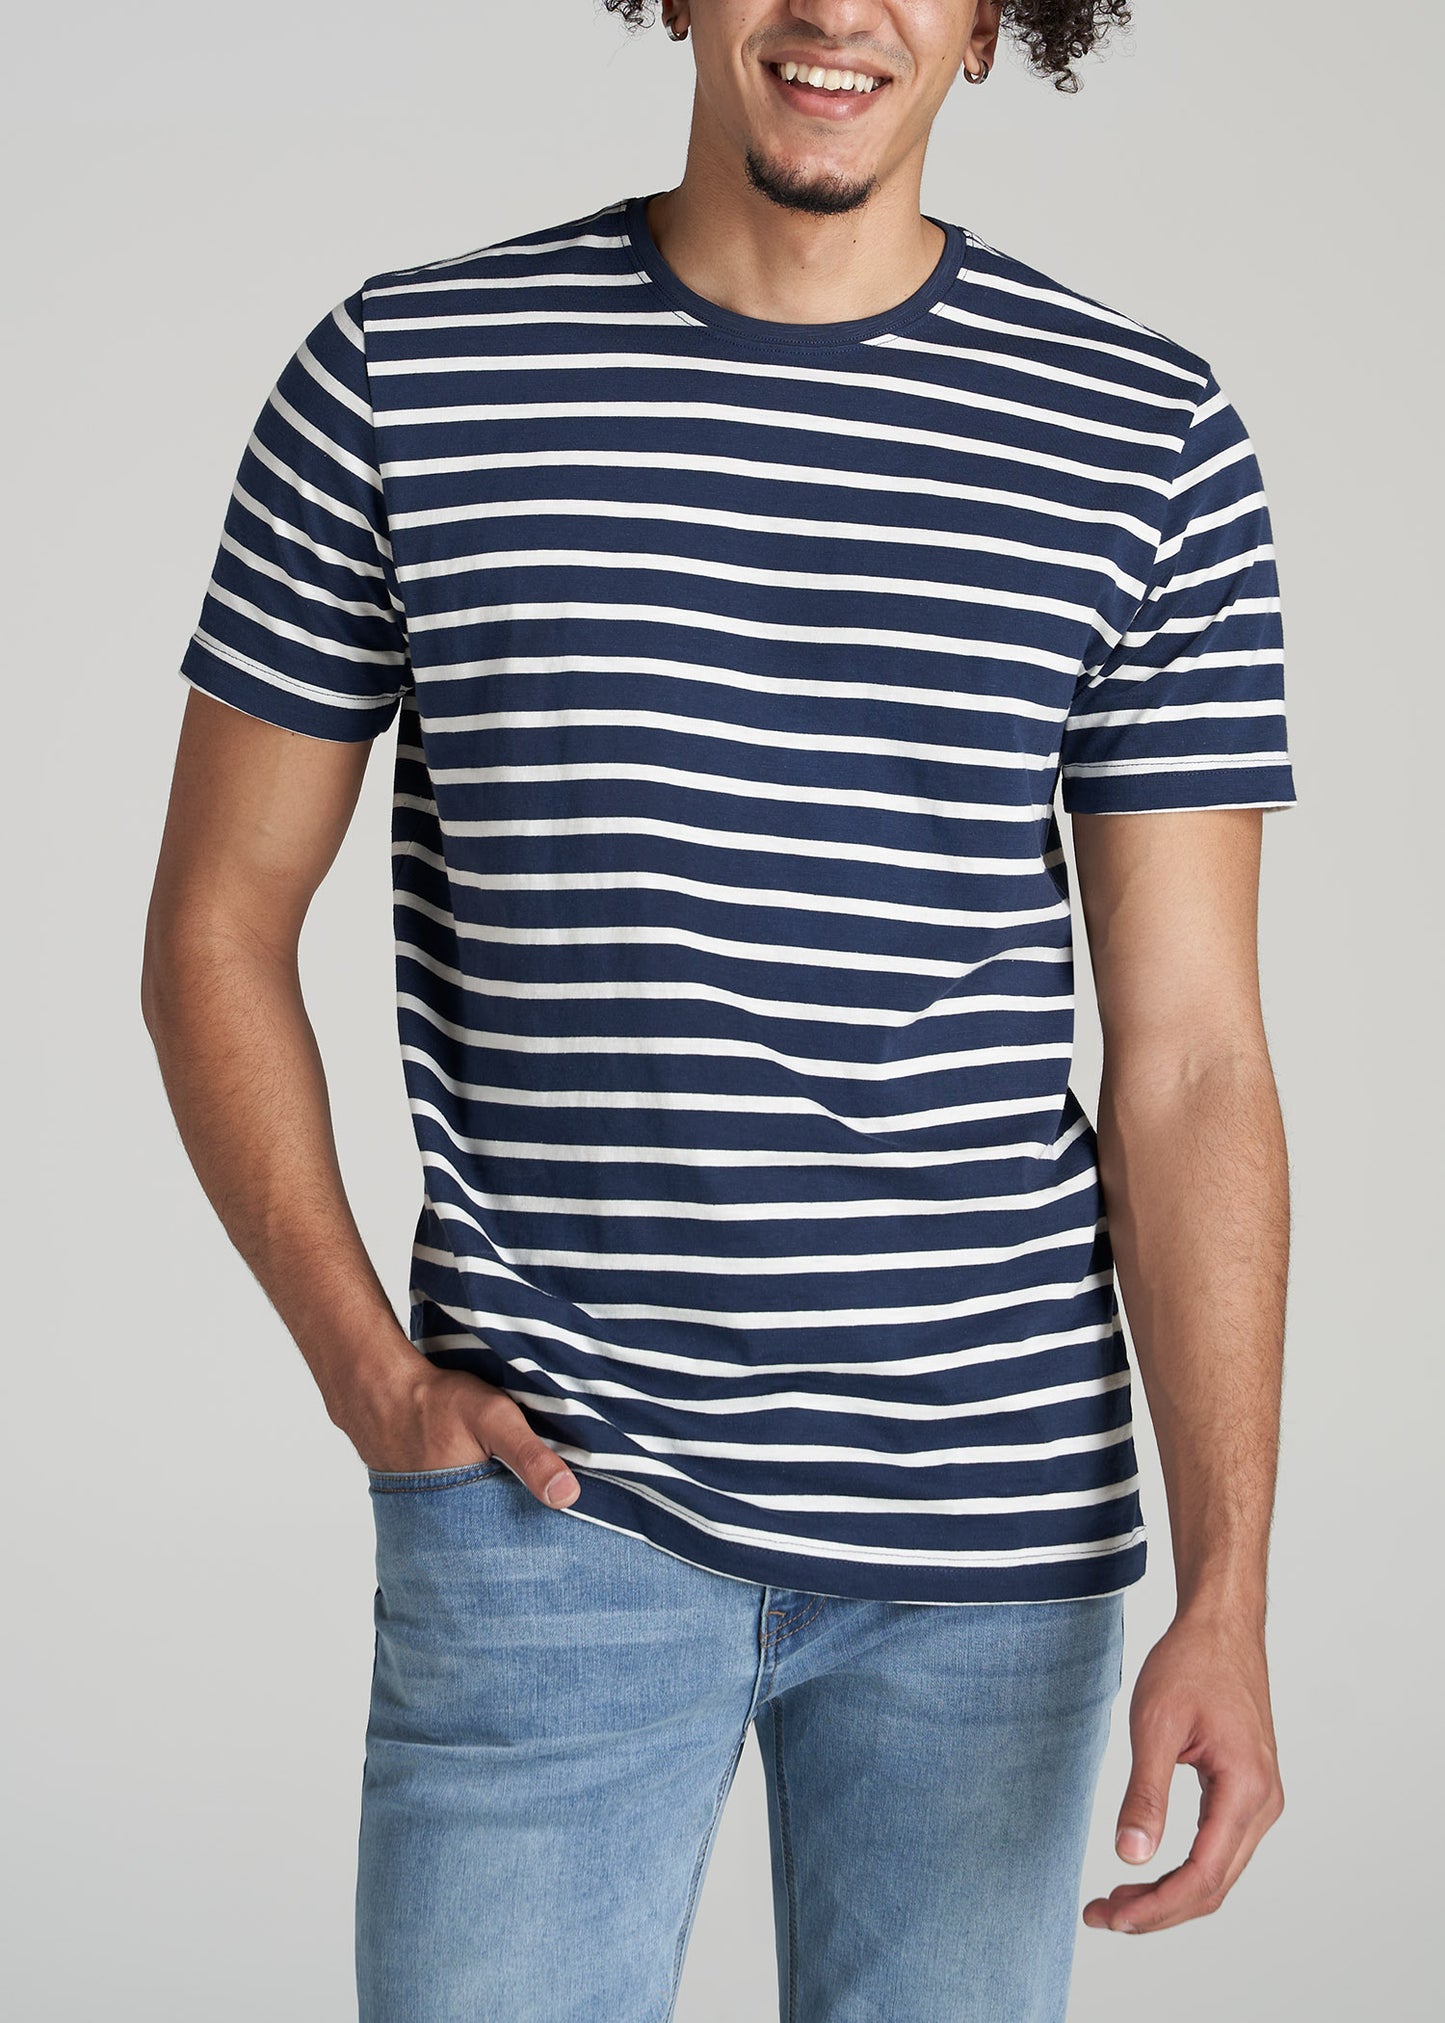 REGULAR-FIT Striped Tee in Navy And White - Men's Tall T-shirt